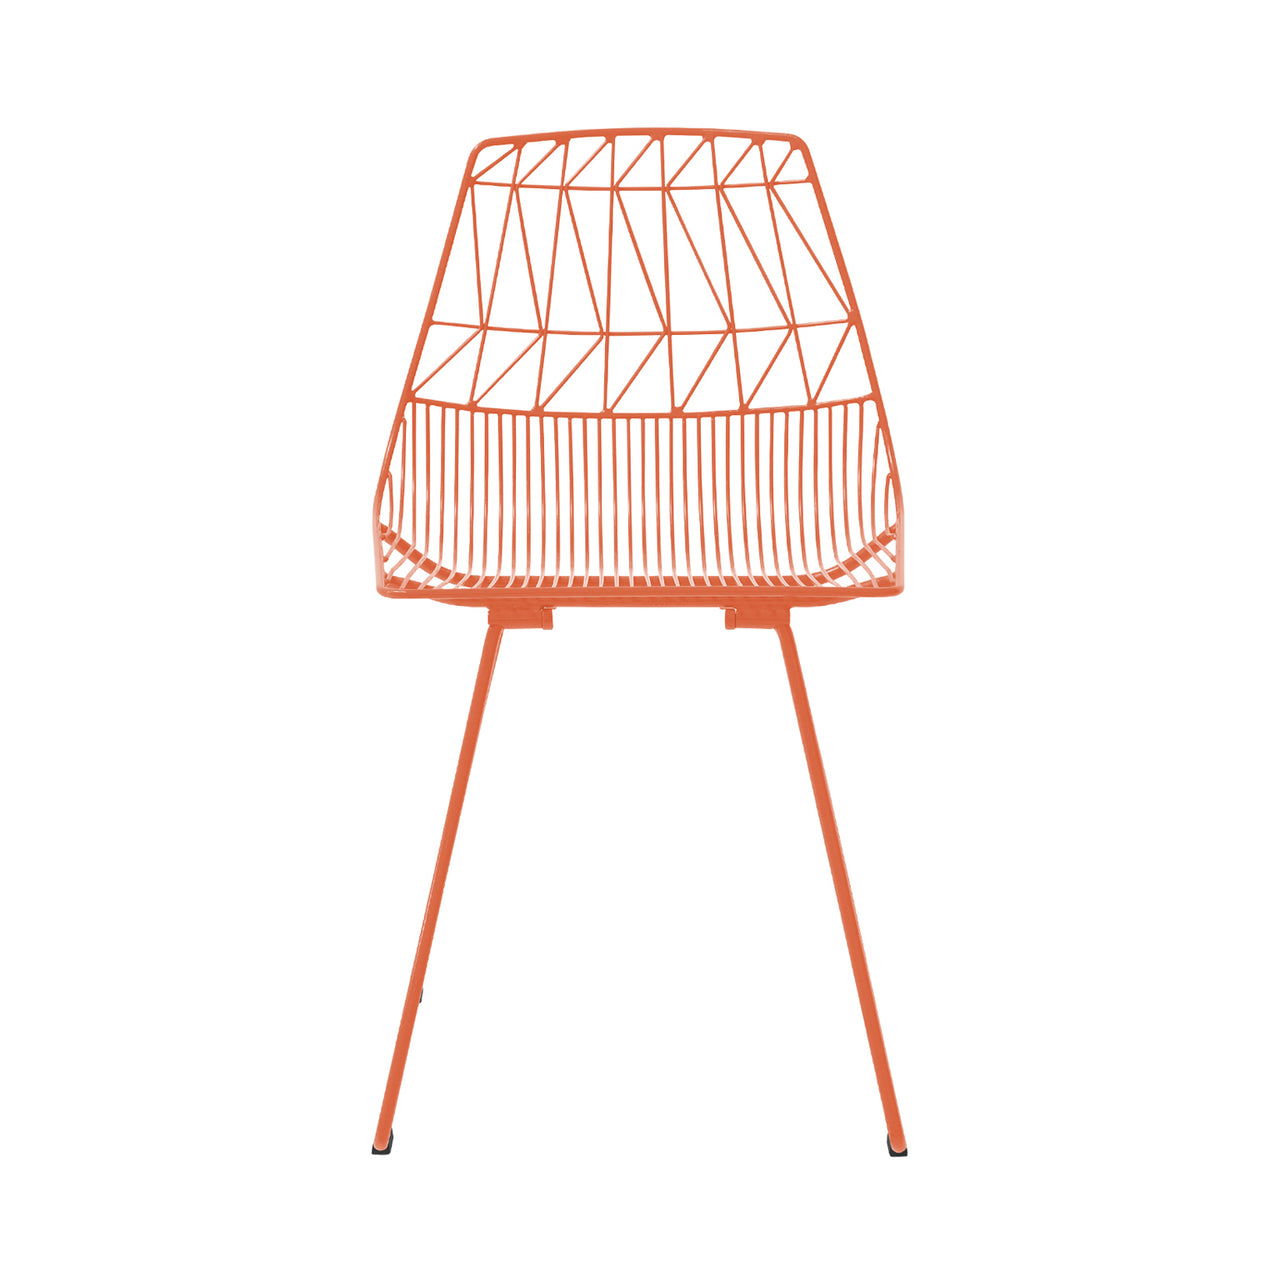 Lucy Chair: Color + Orange + Without Seat Pad